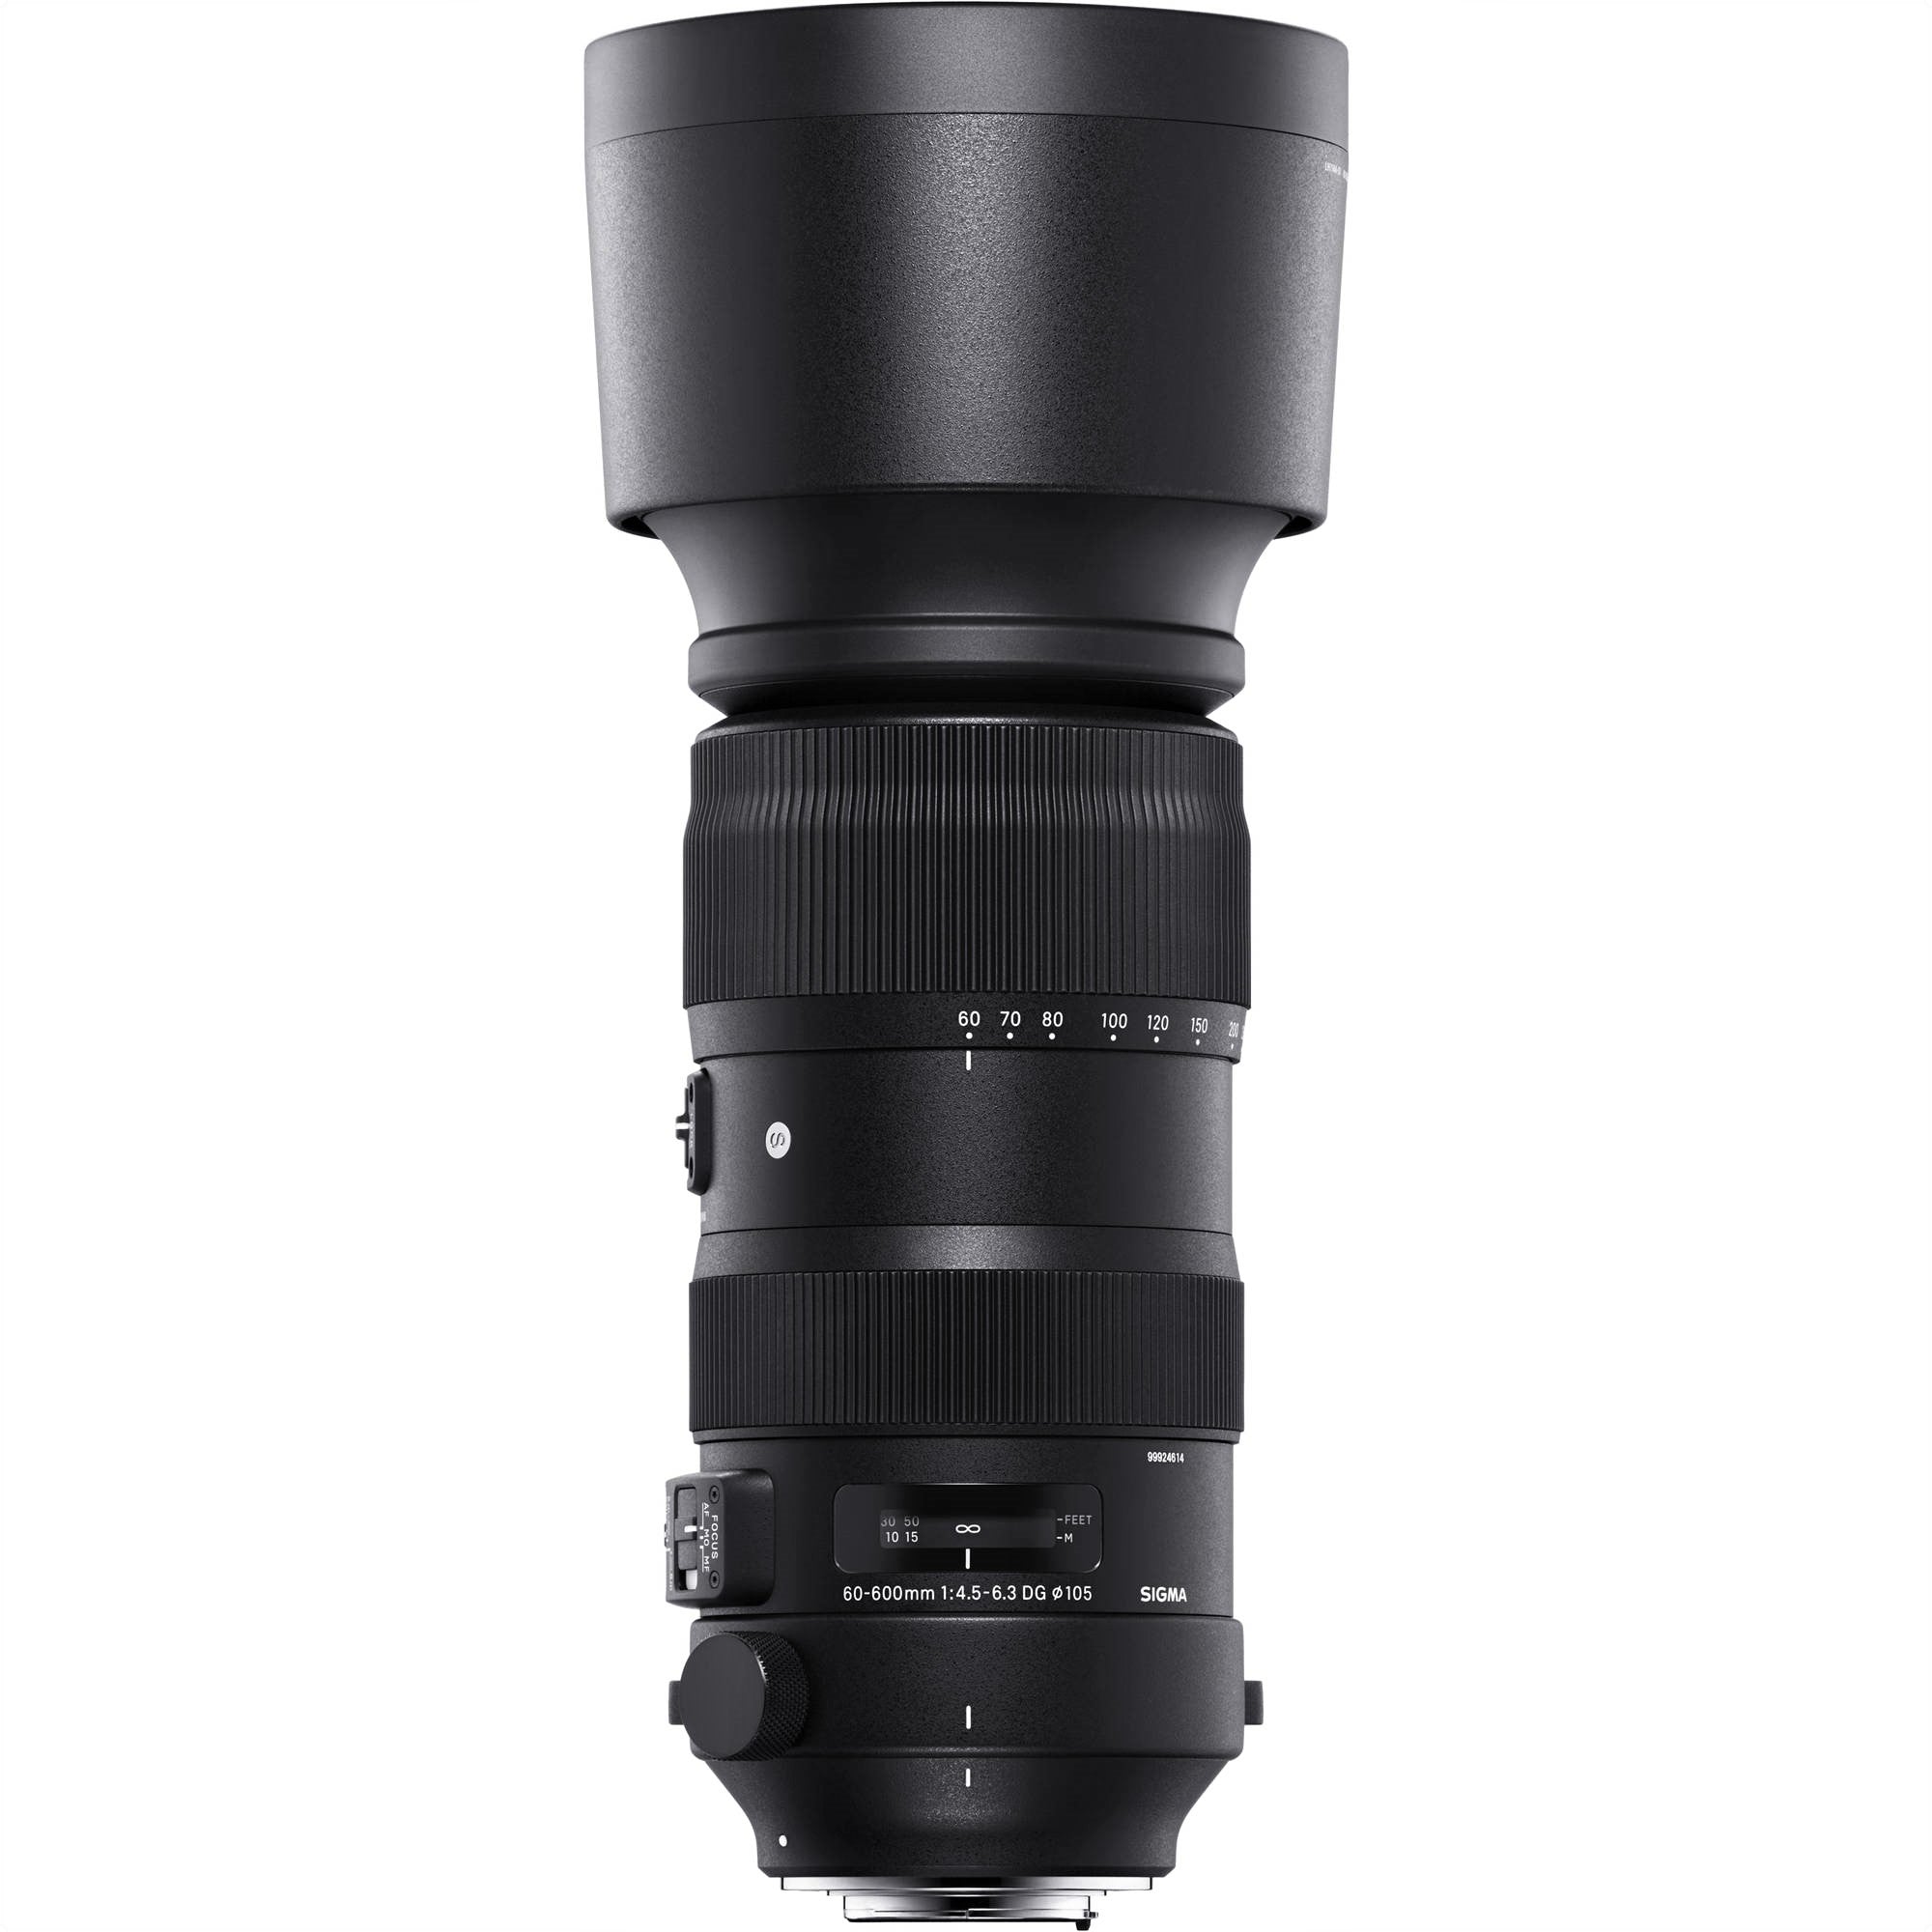 Sigma 60-600mm F4.5-6.3 DG OS HSM Sports Lens for Canon EF with Attached Lens Hood on the Top